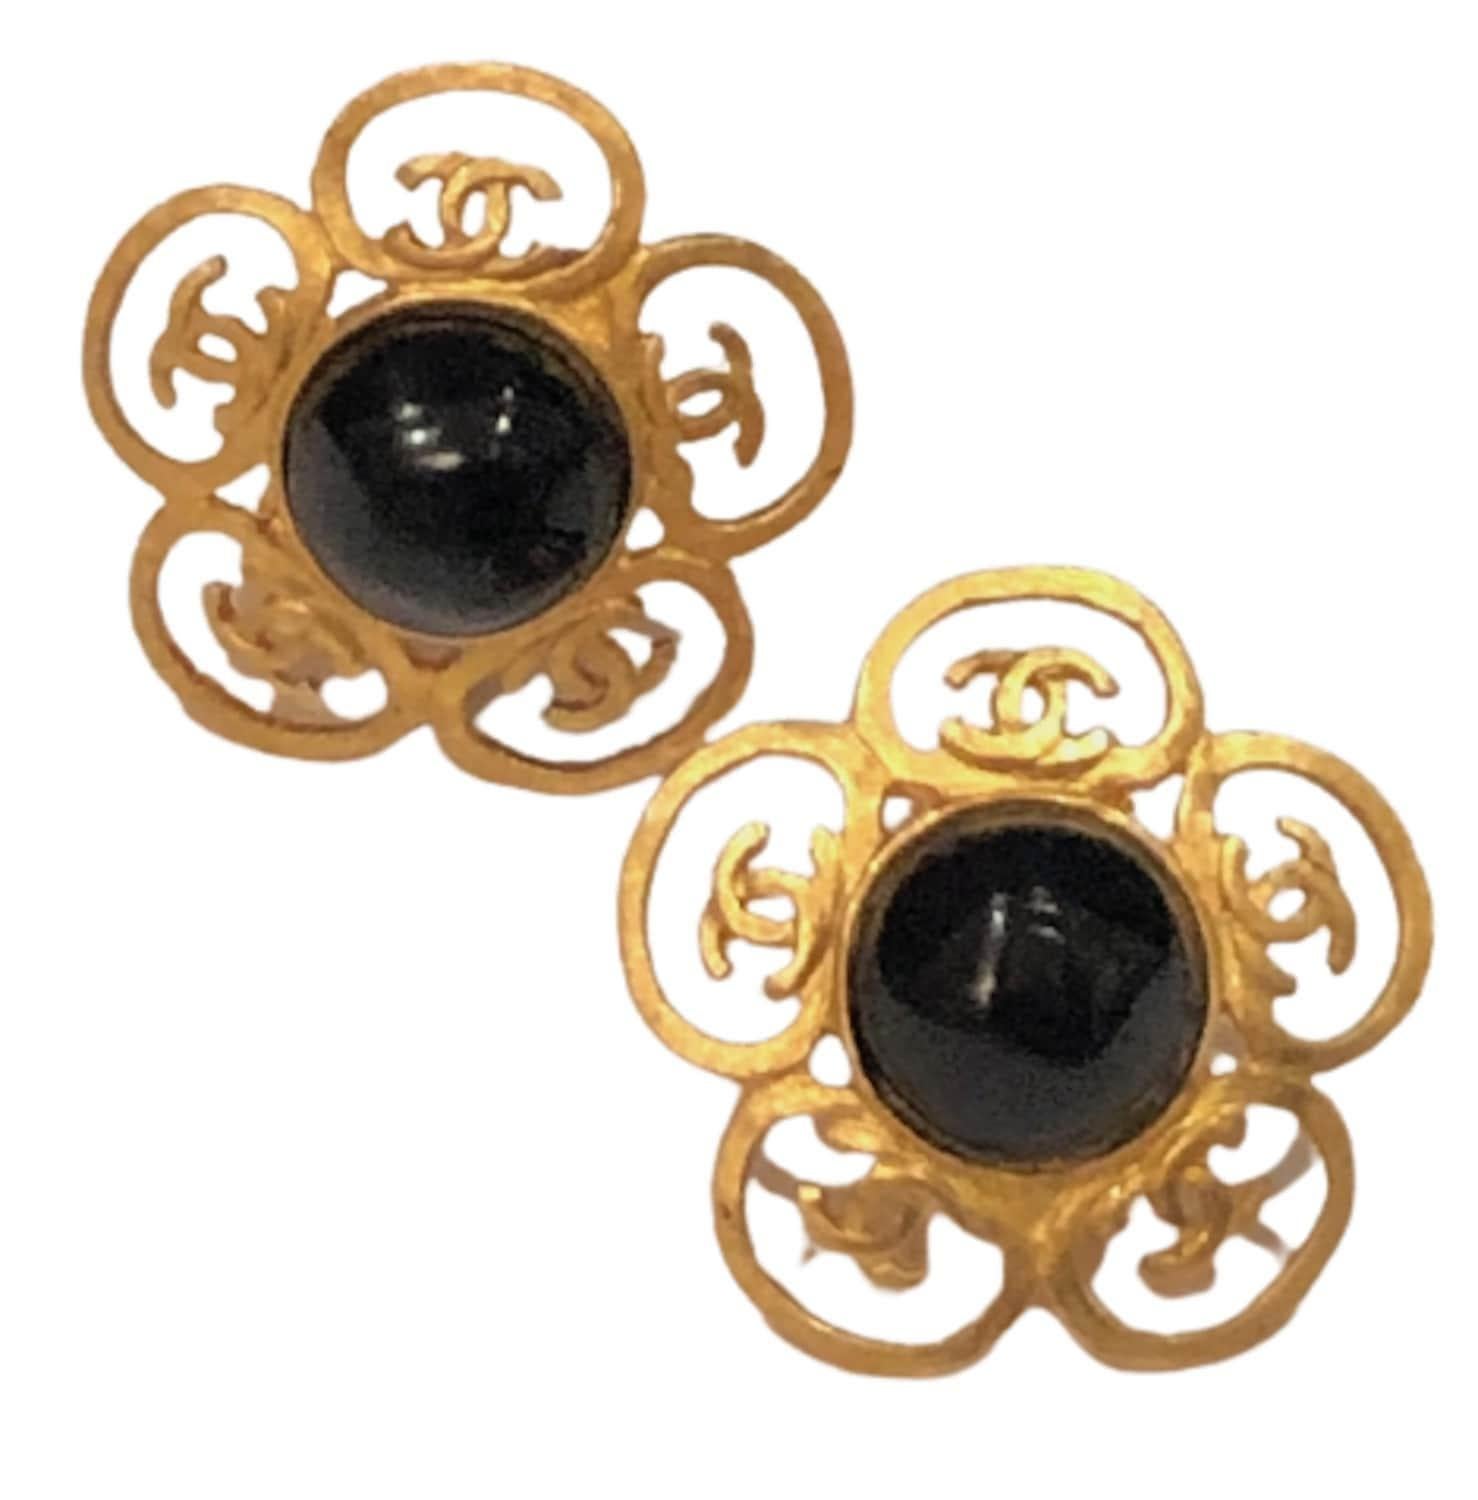 CHANEL Earrings 1995 Vintage Black Gripoix Gold Toned CC Flower Clip On W/Box
A 1995 CHANEL Gripoix flower CC logo clip-on earrings. Featuring five CC logo flower petals in 24k gold plated, set with a black faceted Gripoix stone. In excellent